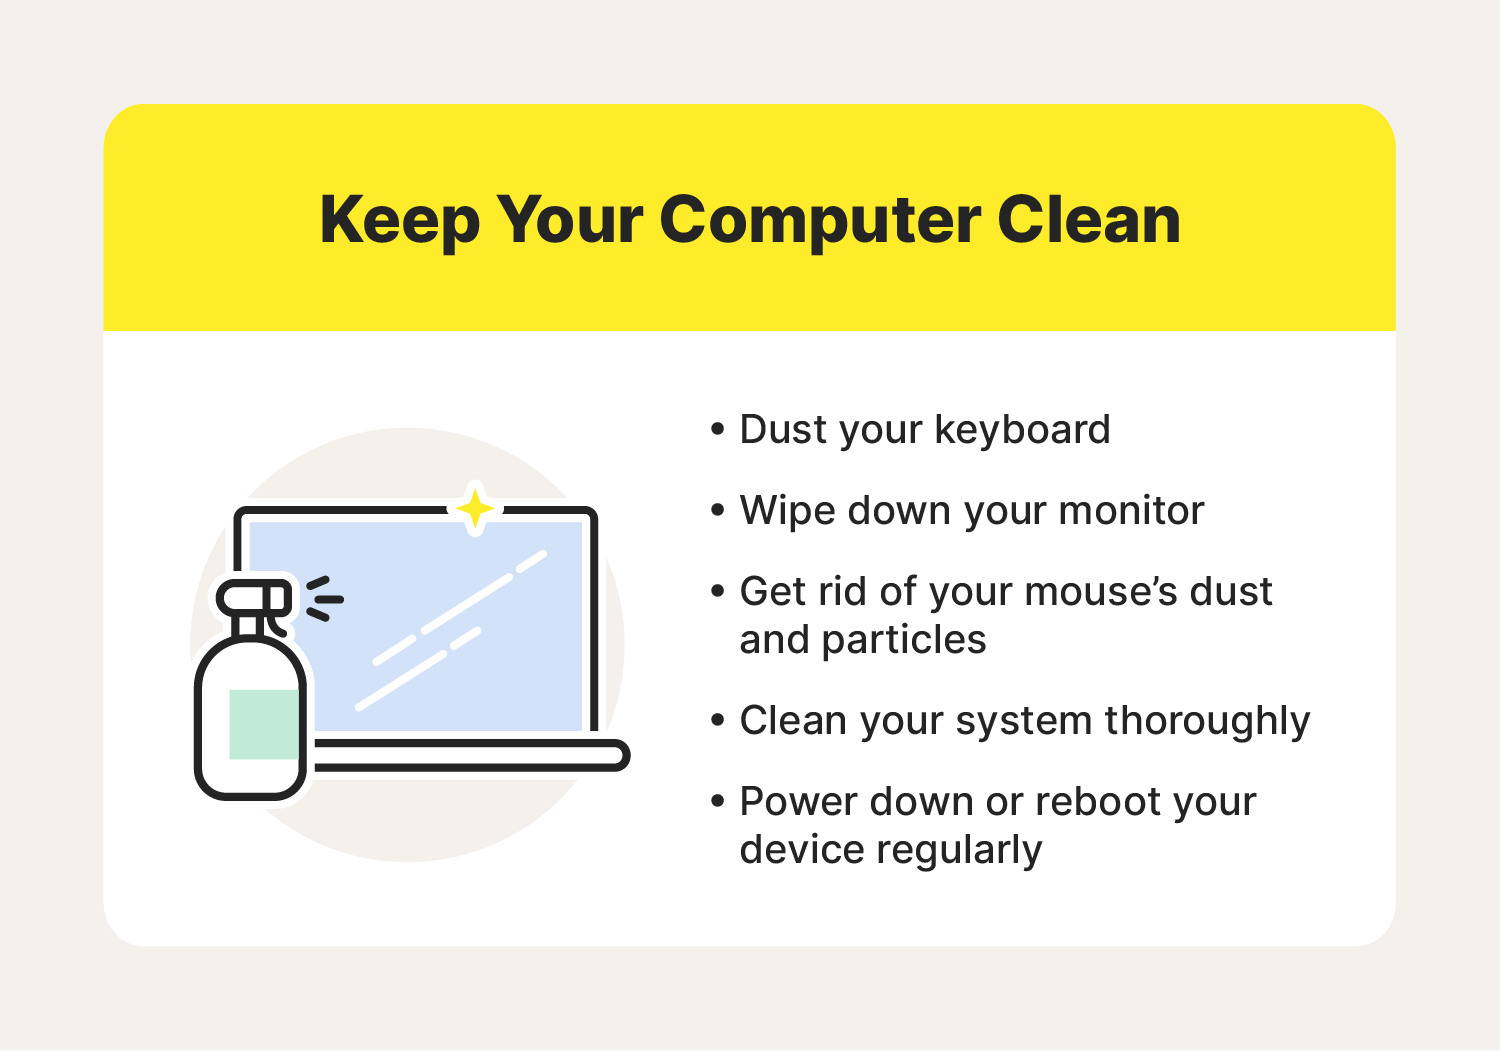 Keep your computer clean